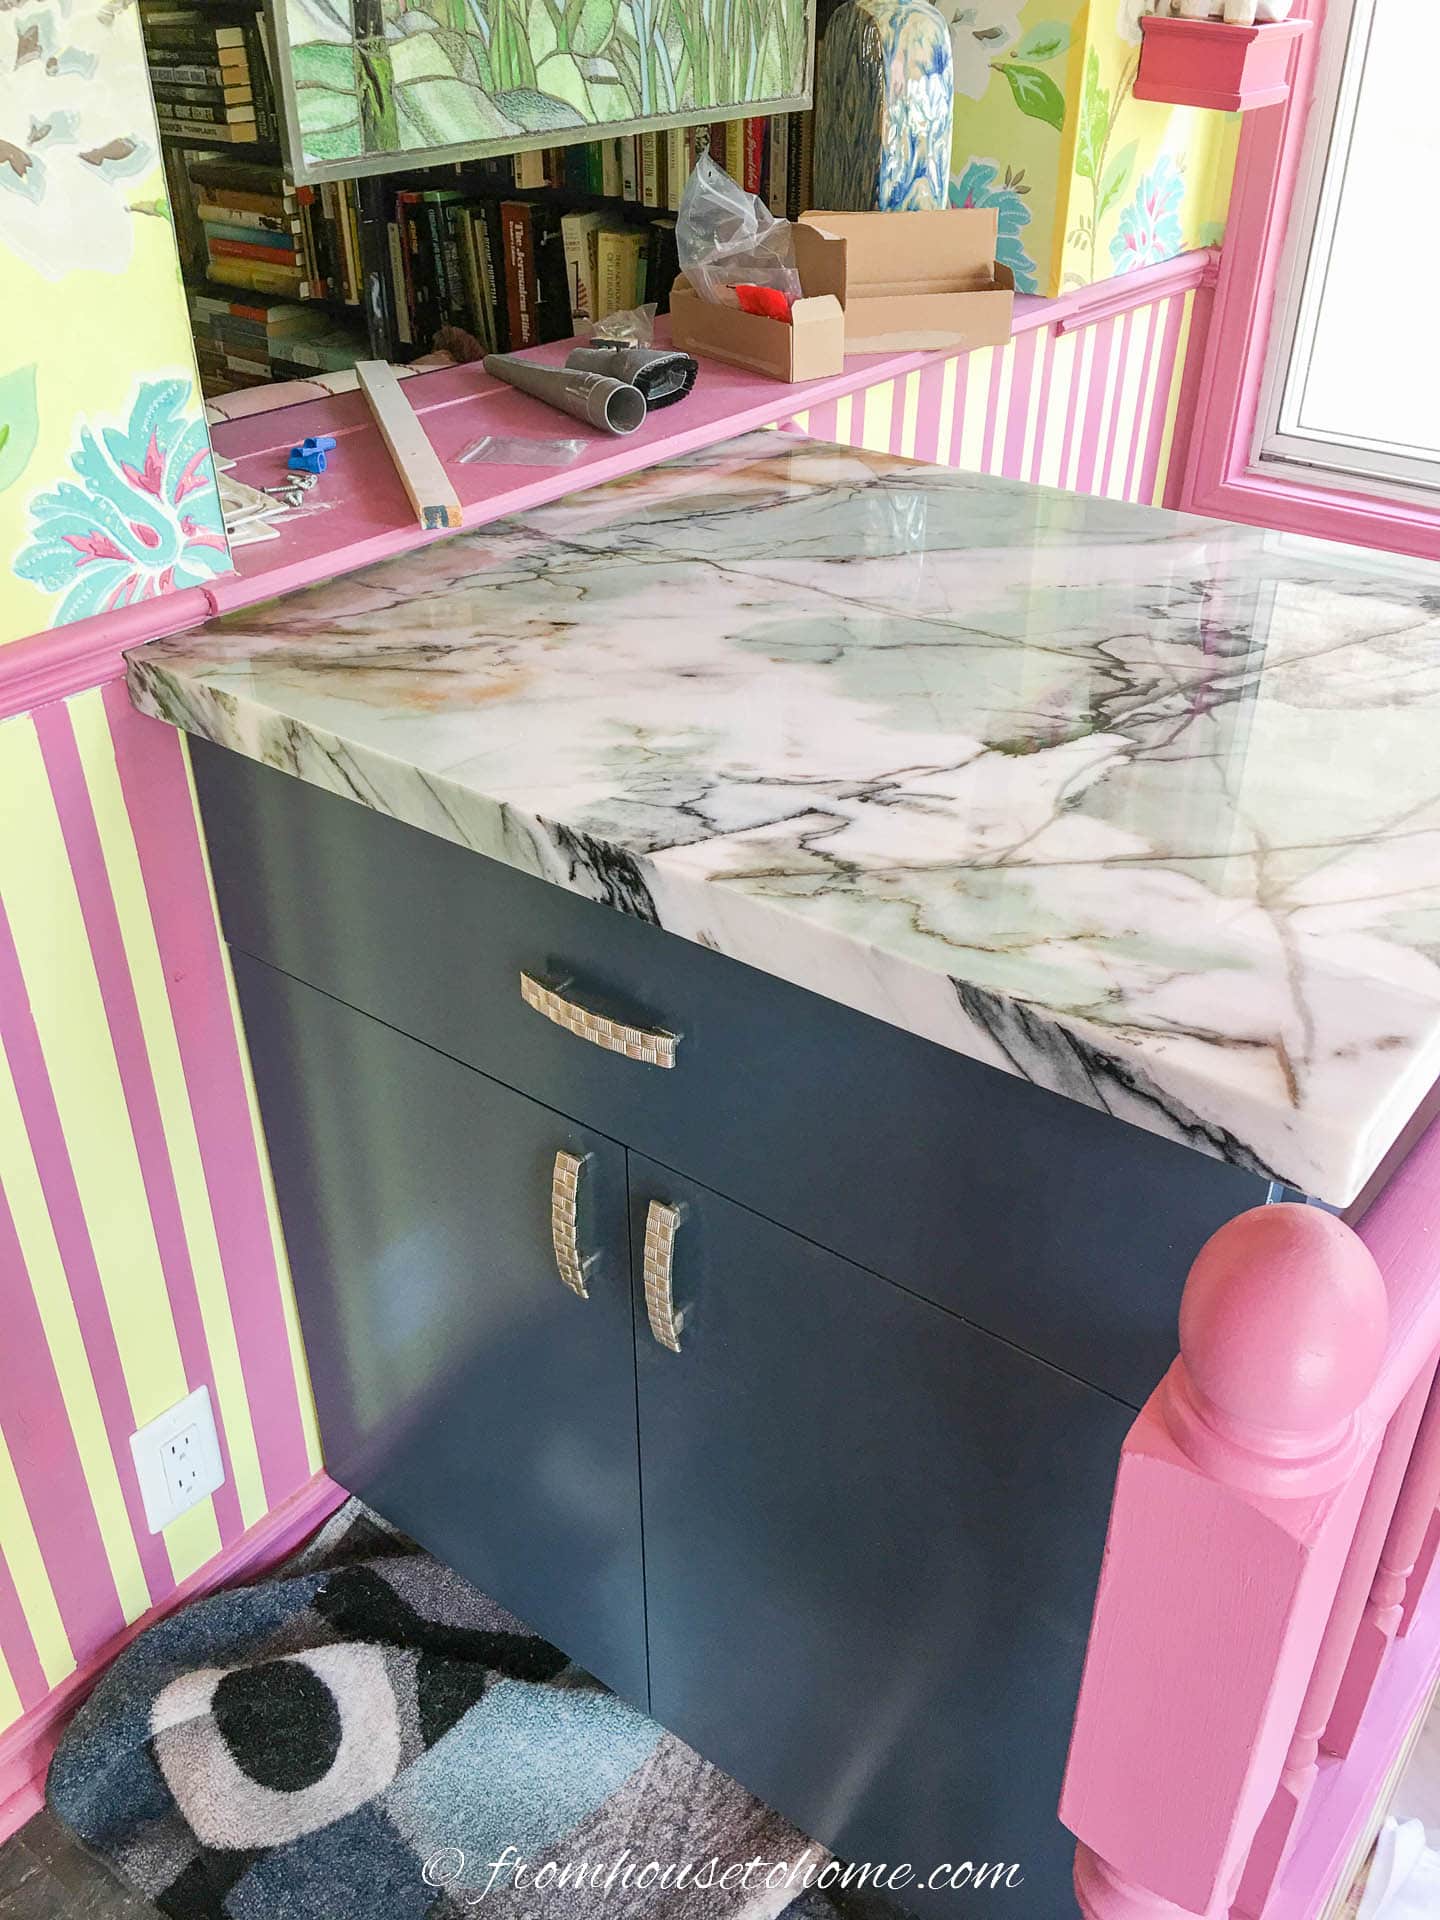 Teal base cabinet with a teal, white and black quartzite countertop